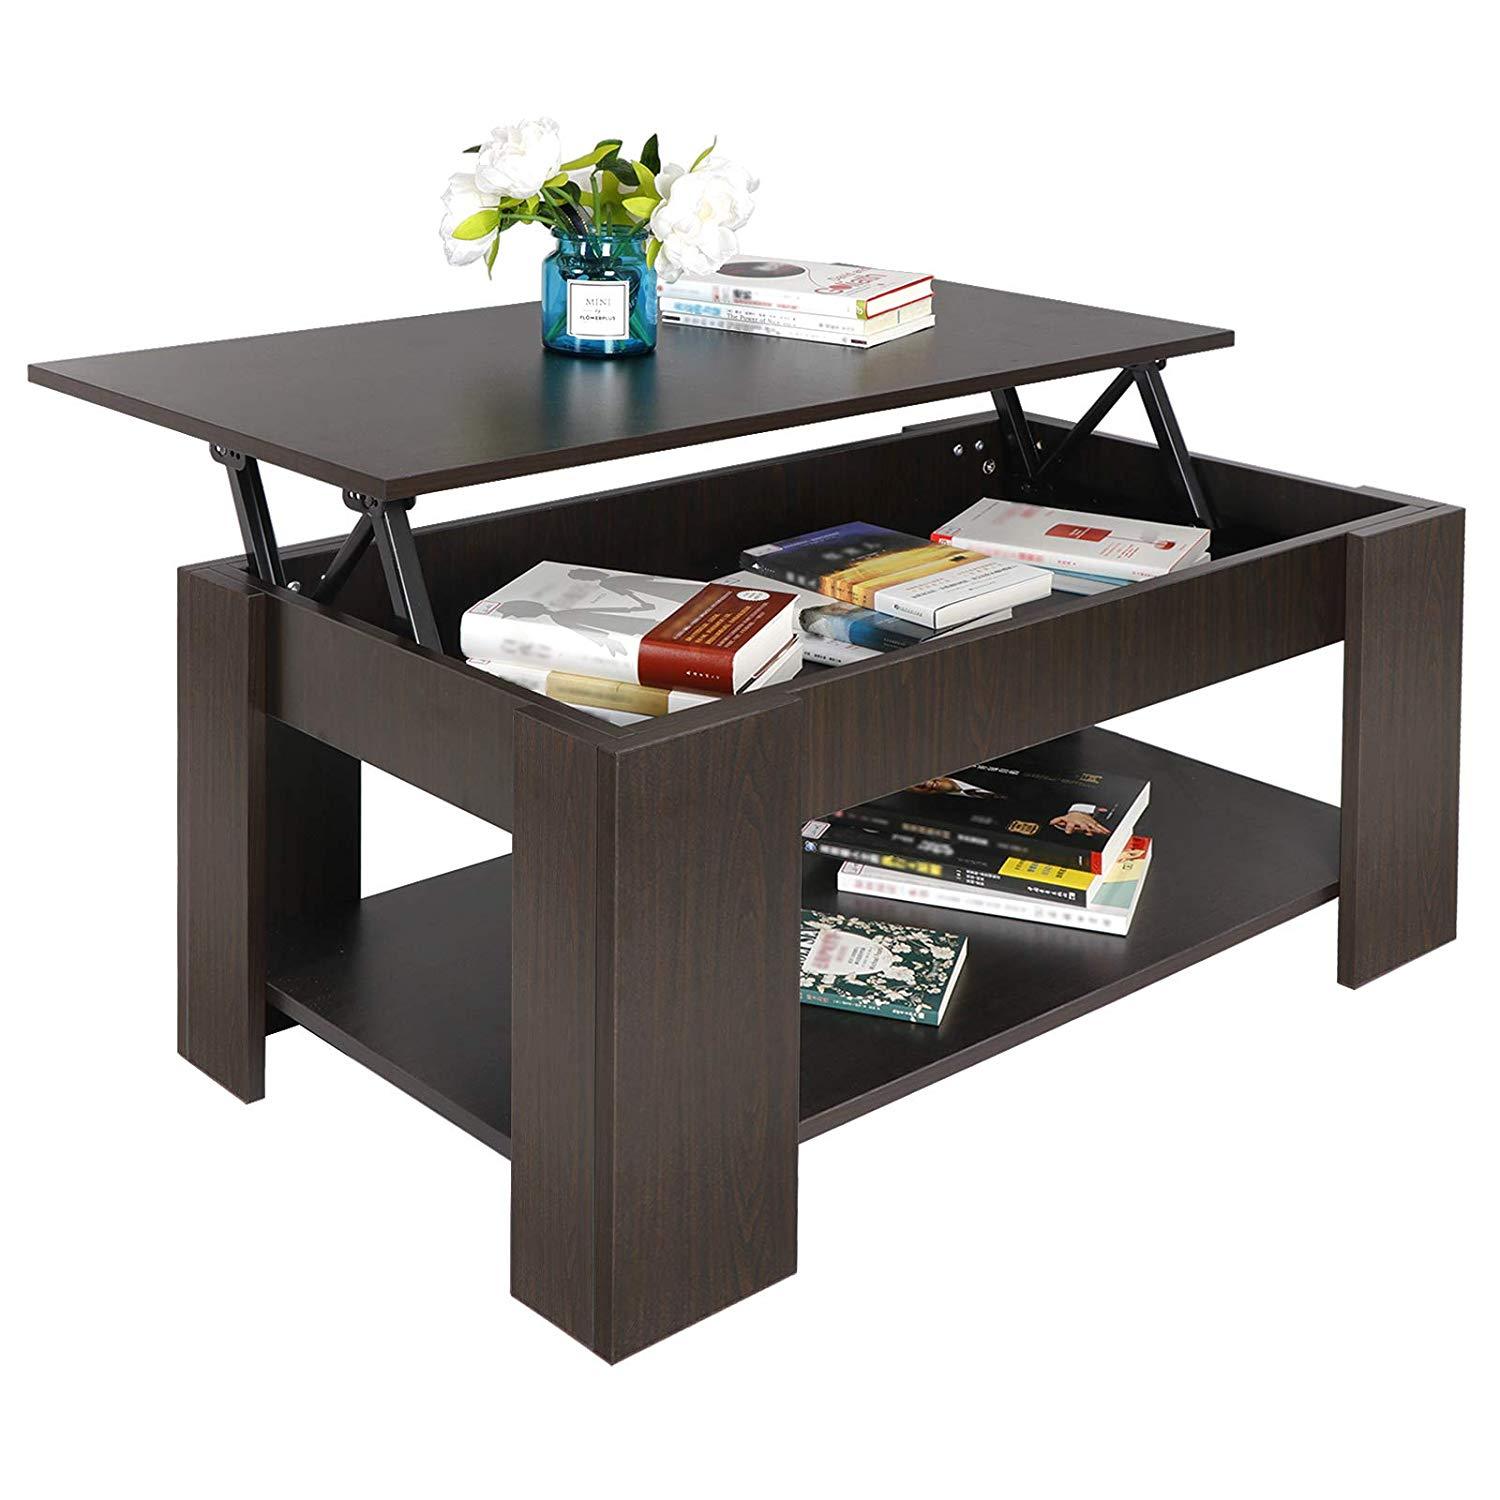 Folding coffee table set,top sales home furniture wooden cof